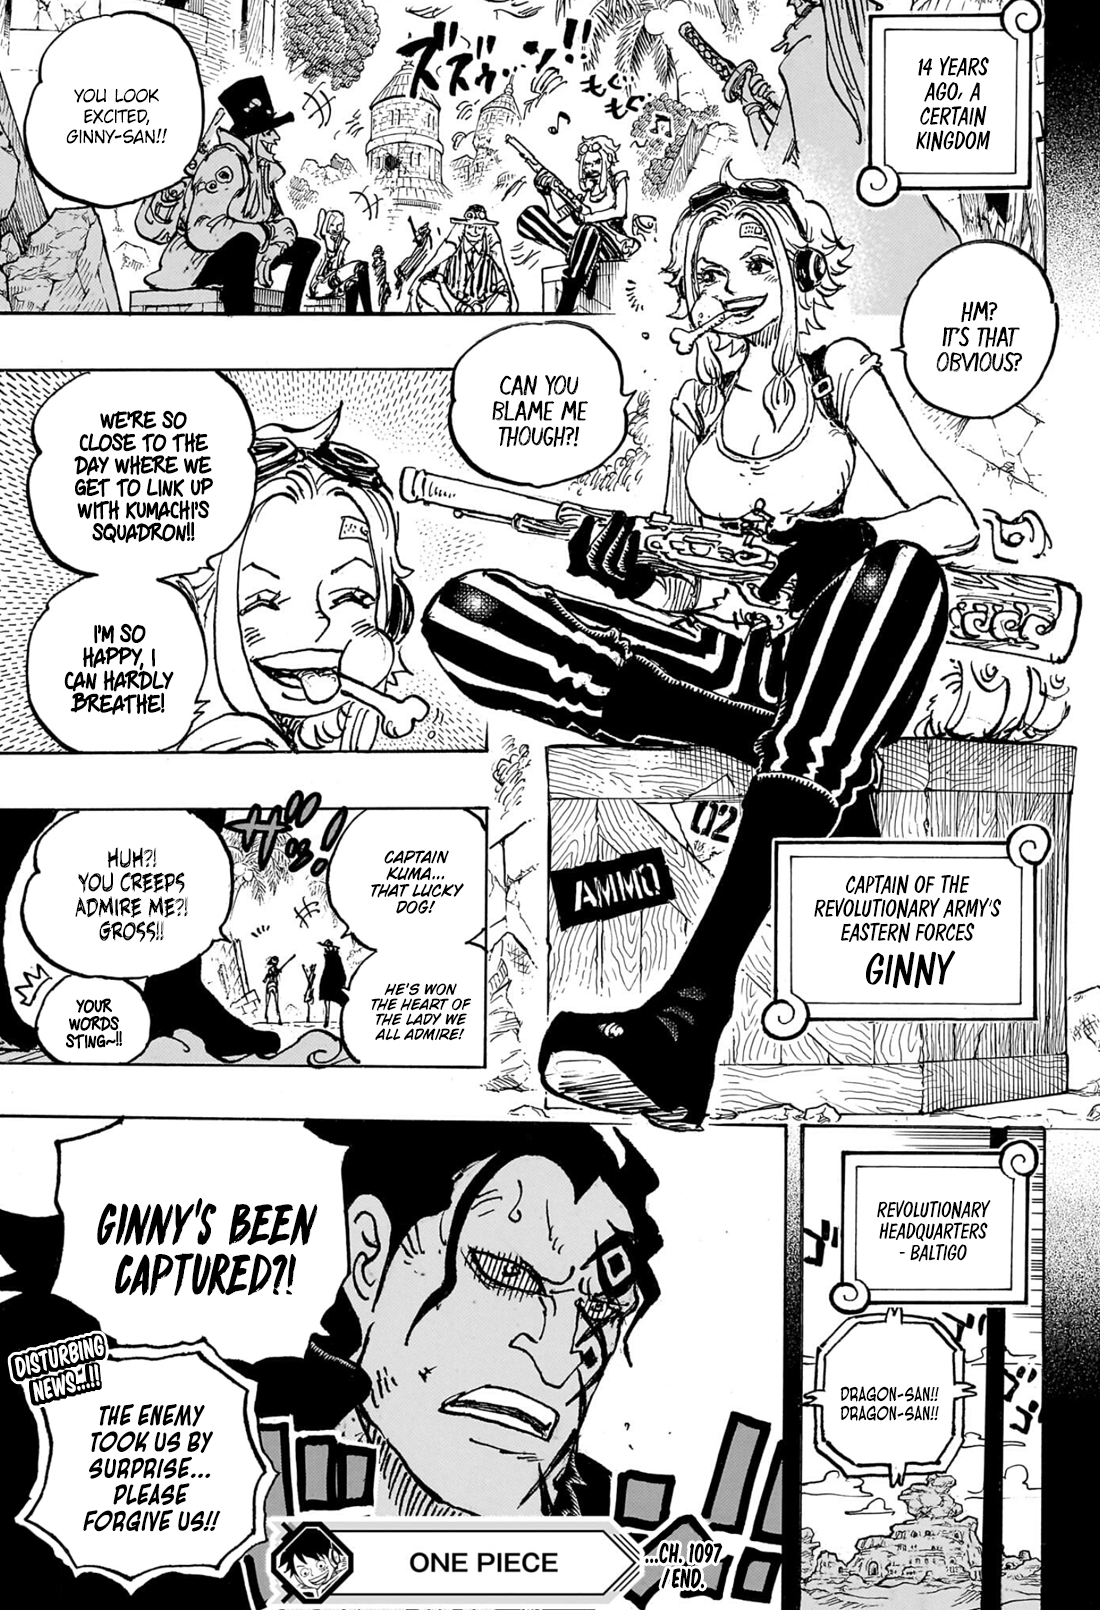 One Piece, Chapter 1097 | TcbScans Org - Free Manga Online in High 